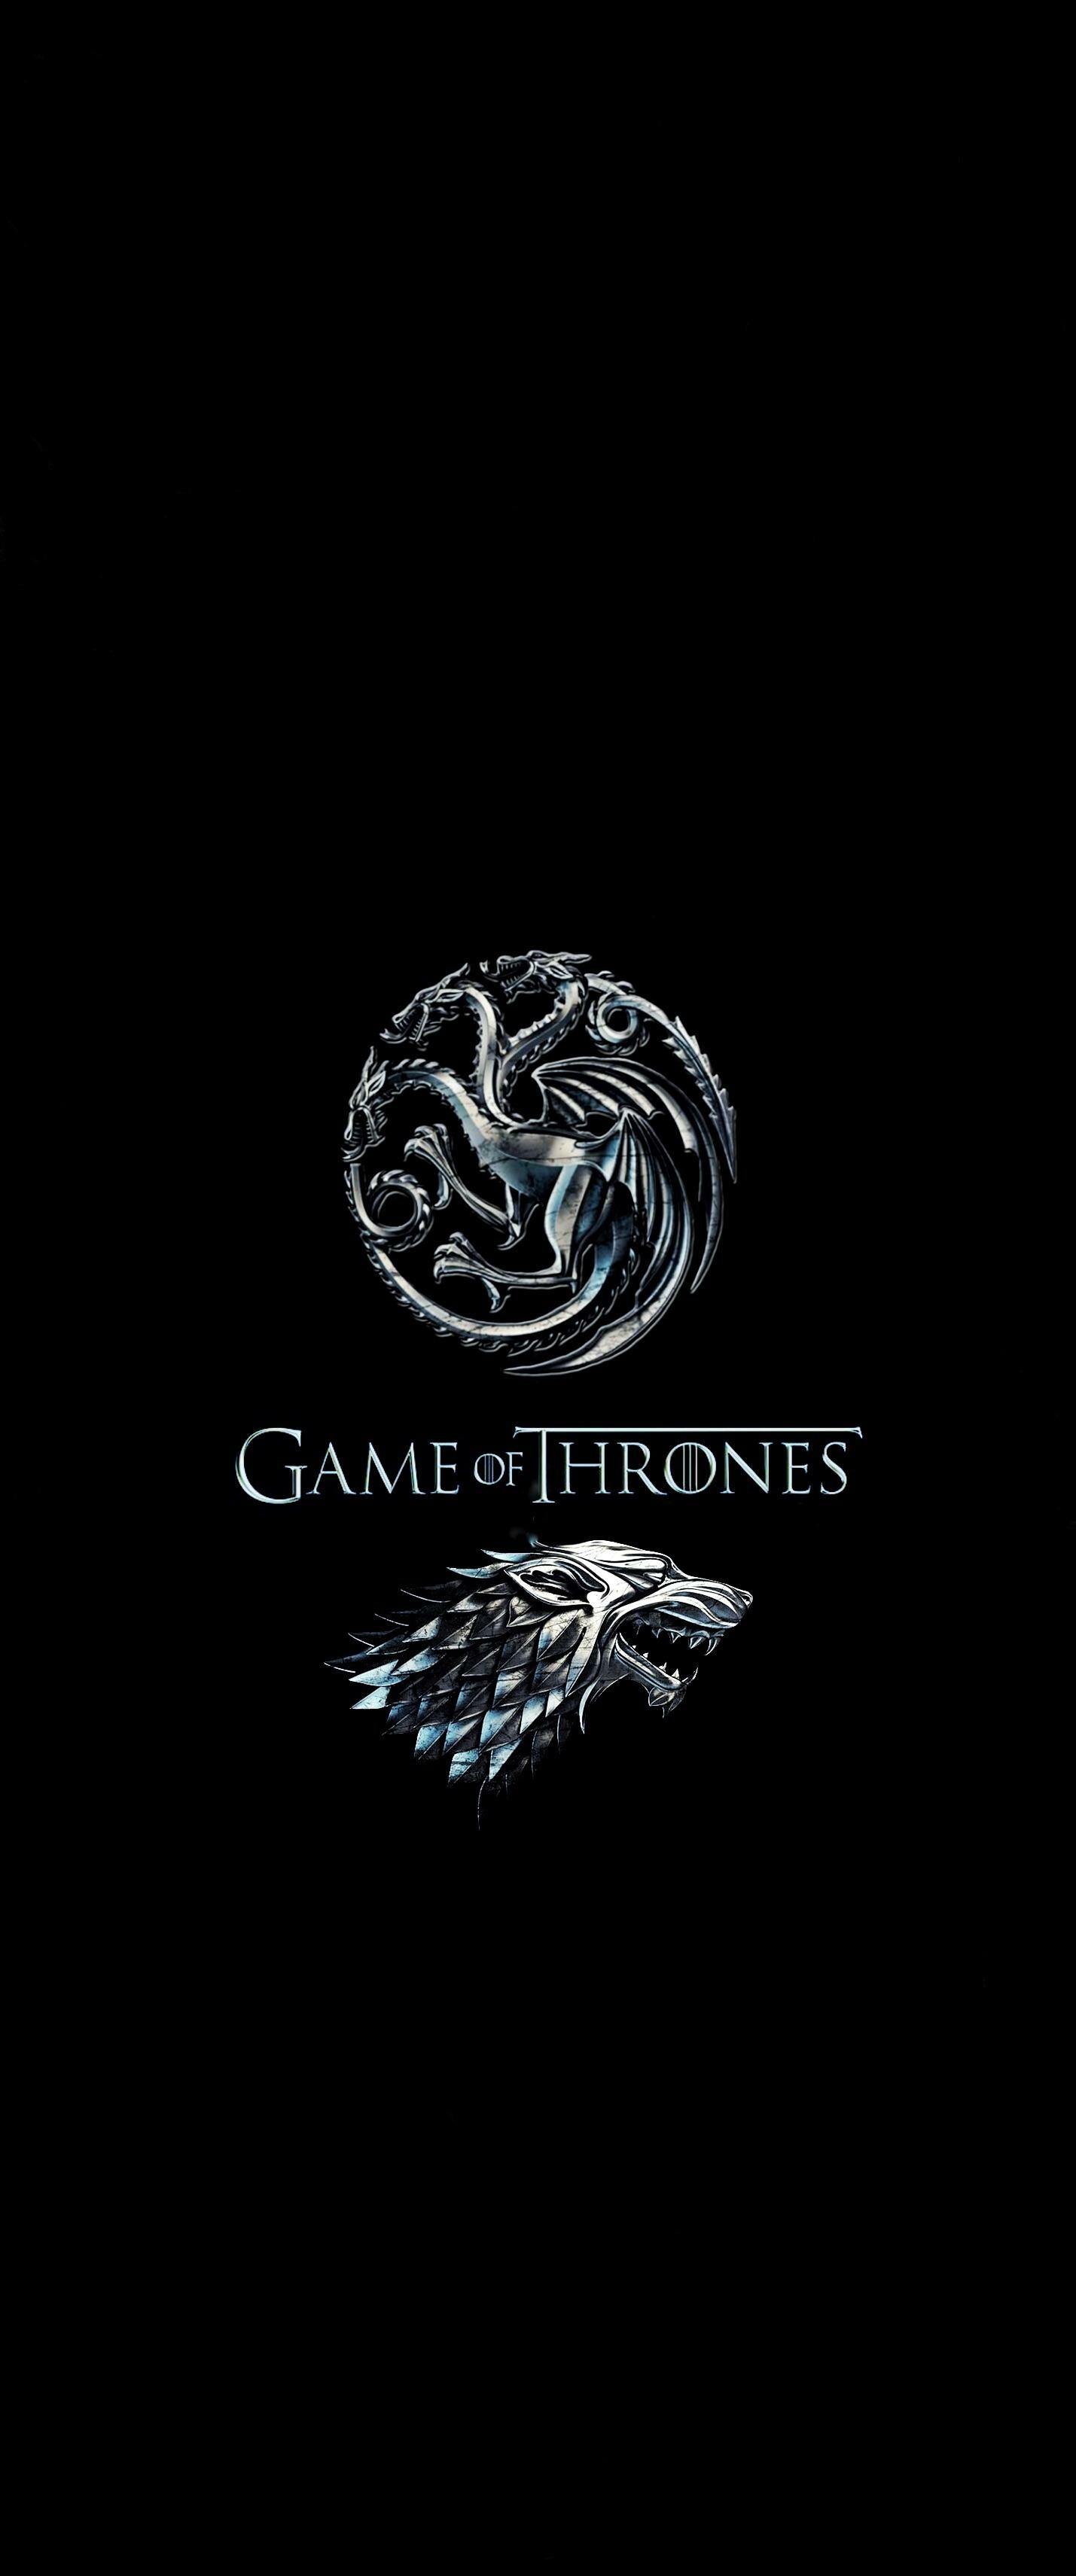 Game of Thrones: House Targaryen and House Stark, HBO series. 1430x3430 HD Background.